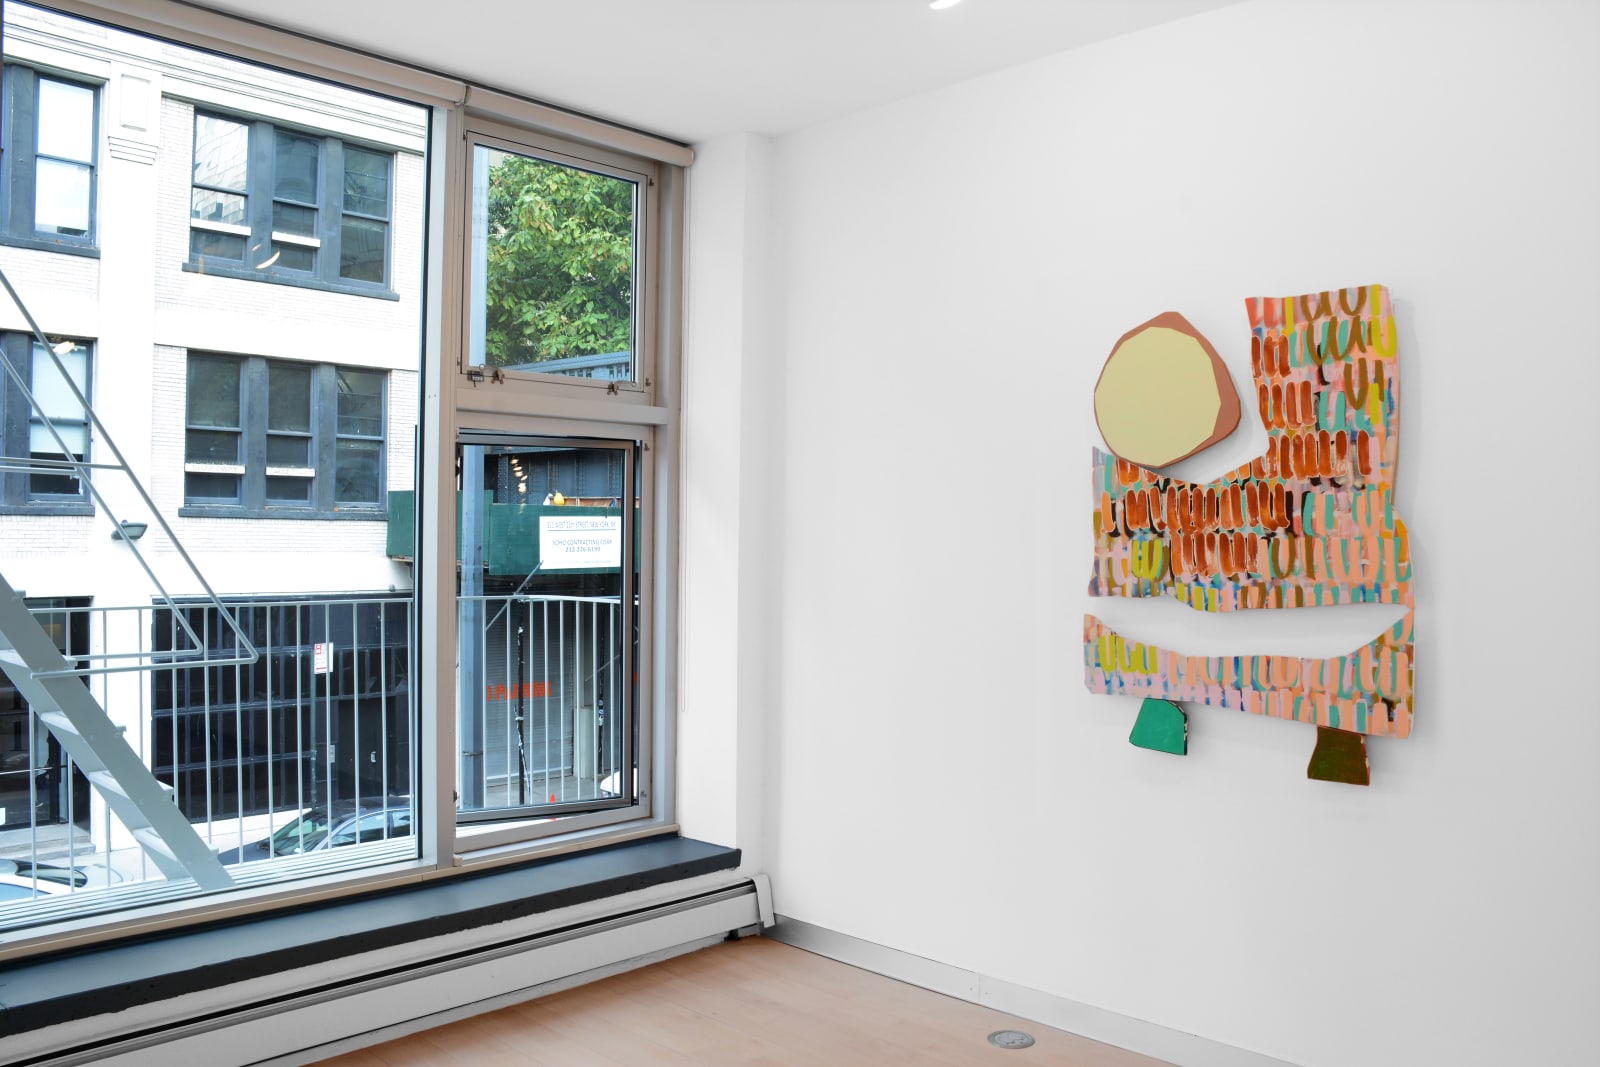 Hollis Taggart Contemporary, 514 West 25th Street, 2nd Floor, New York, NY (2019)